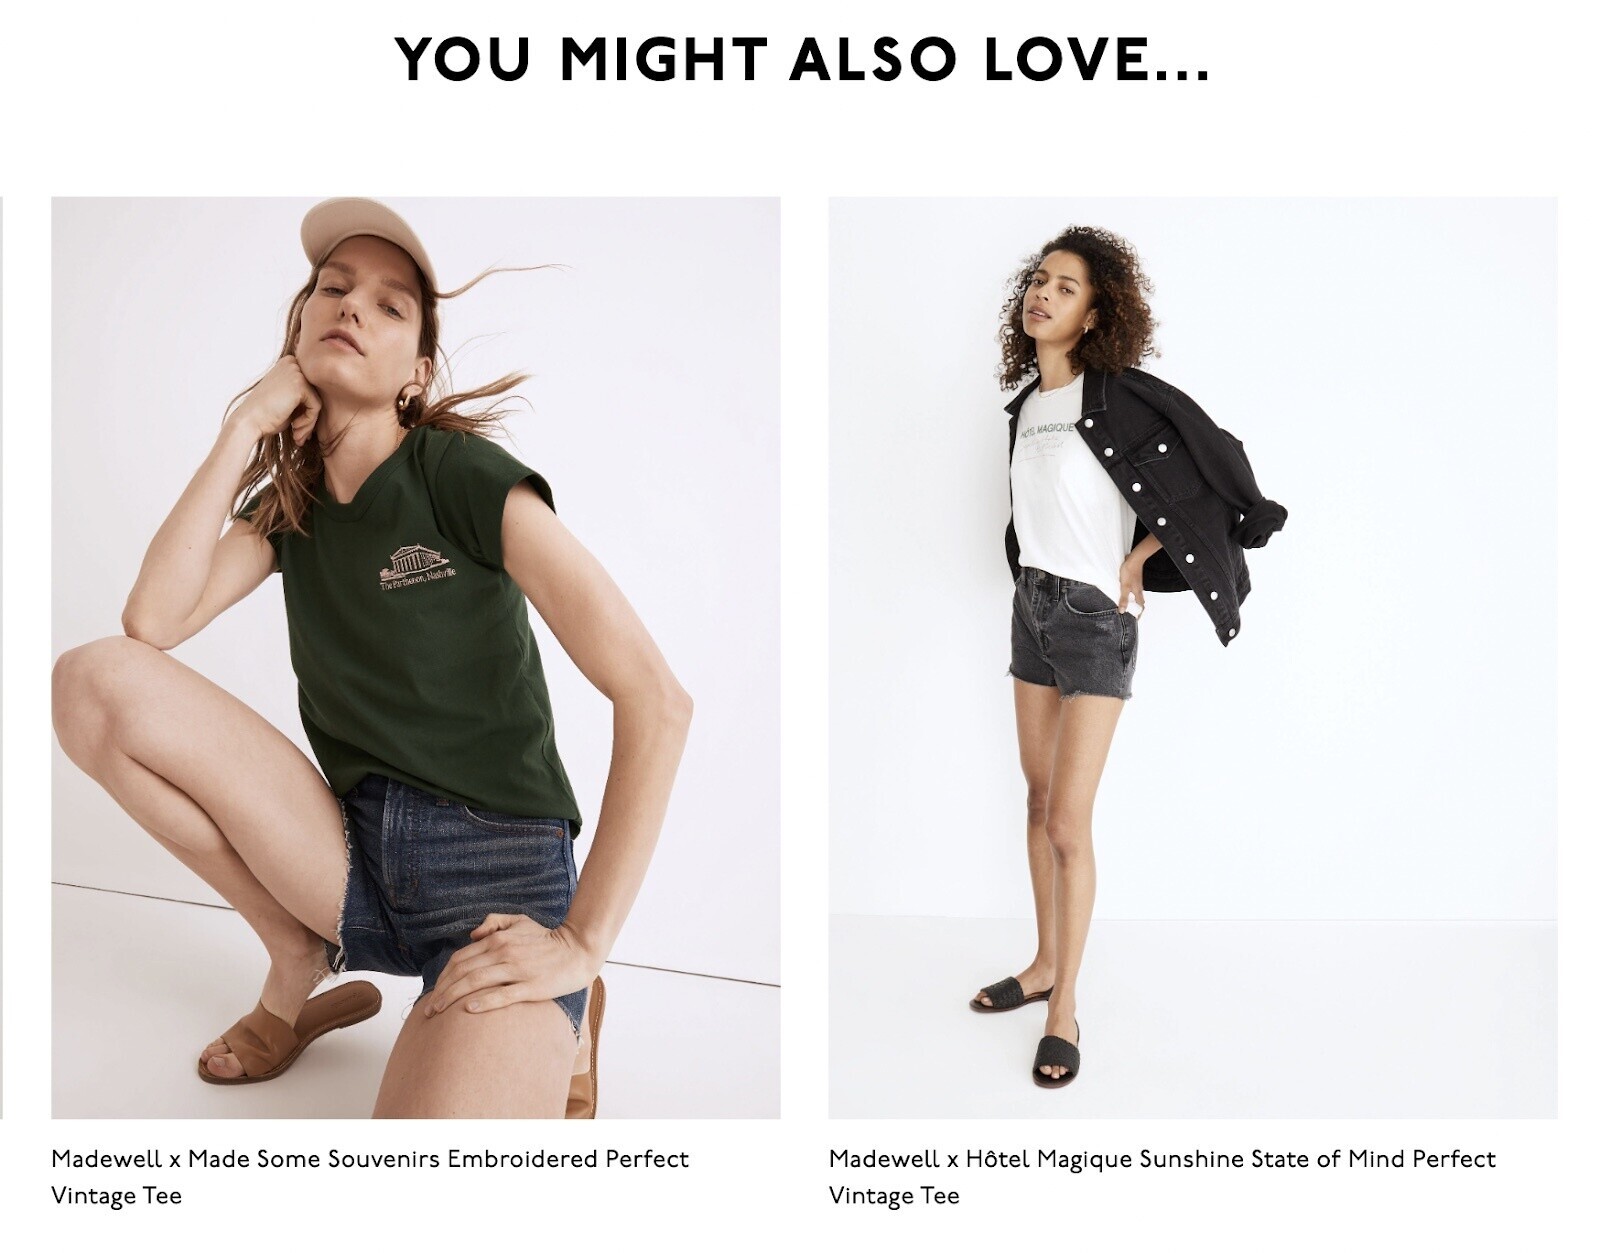 “You Might Also Love” section on Madewell's site